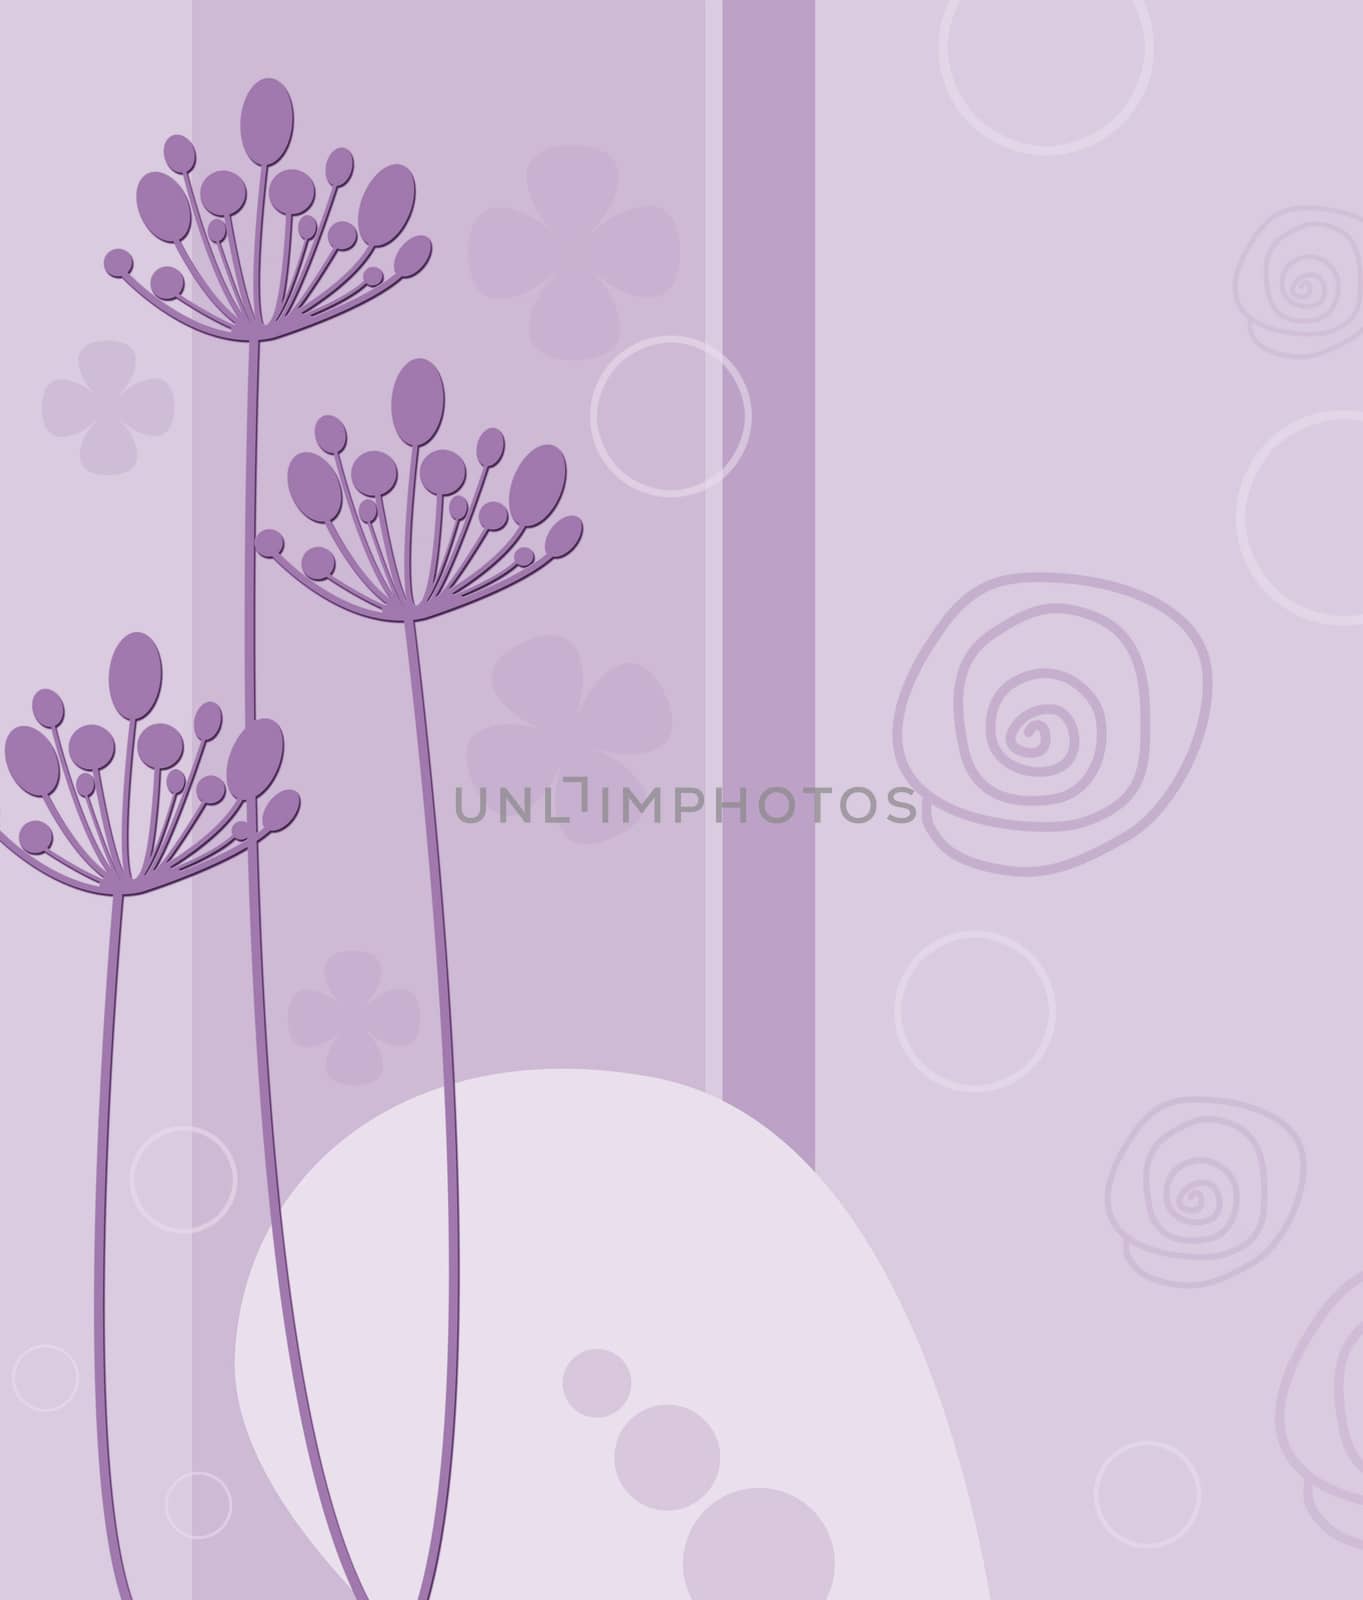 Delicate garden in abstract style.